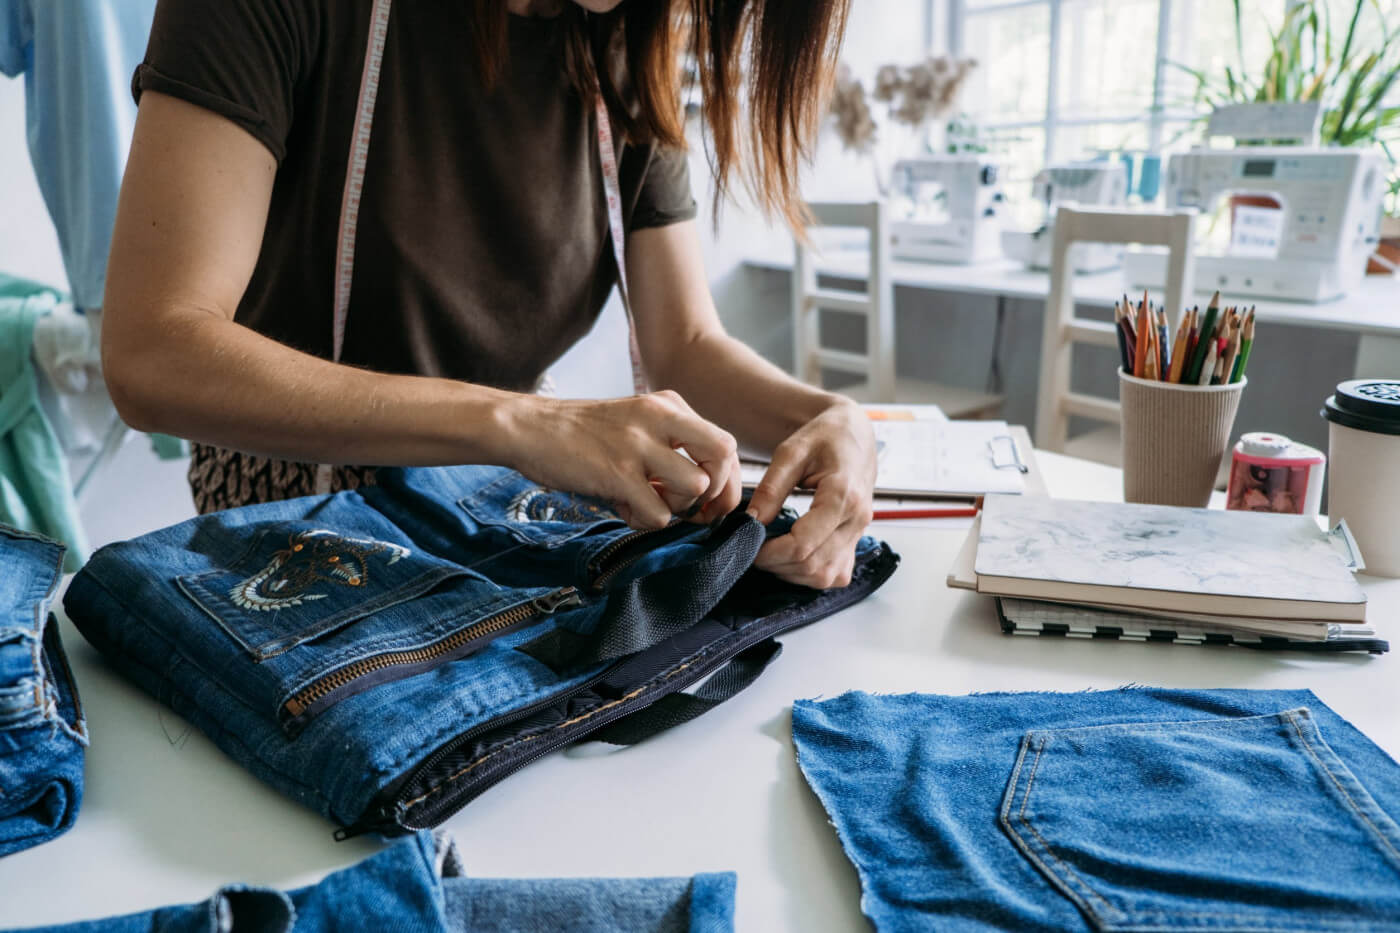 How to Clean Vintage Denim and Get it Looking Like New